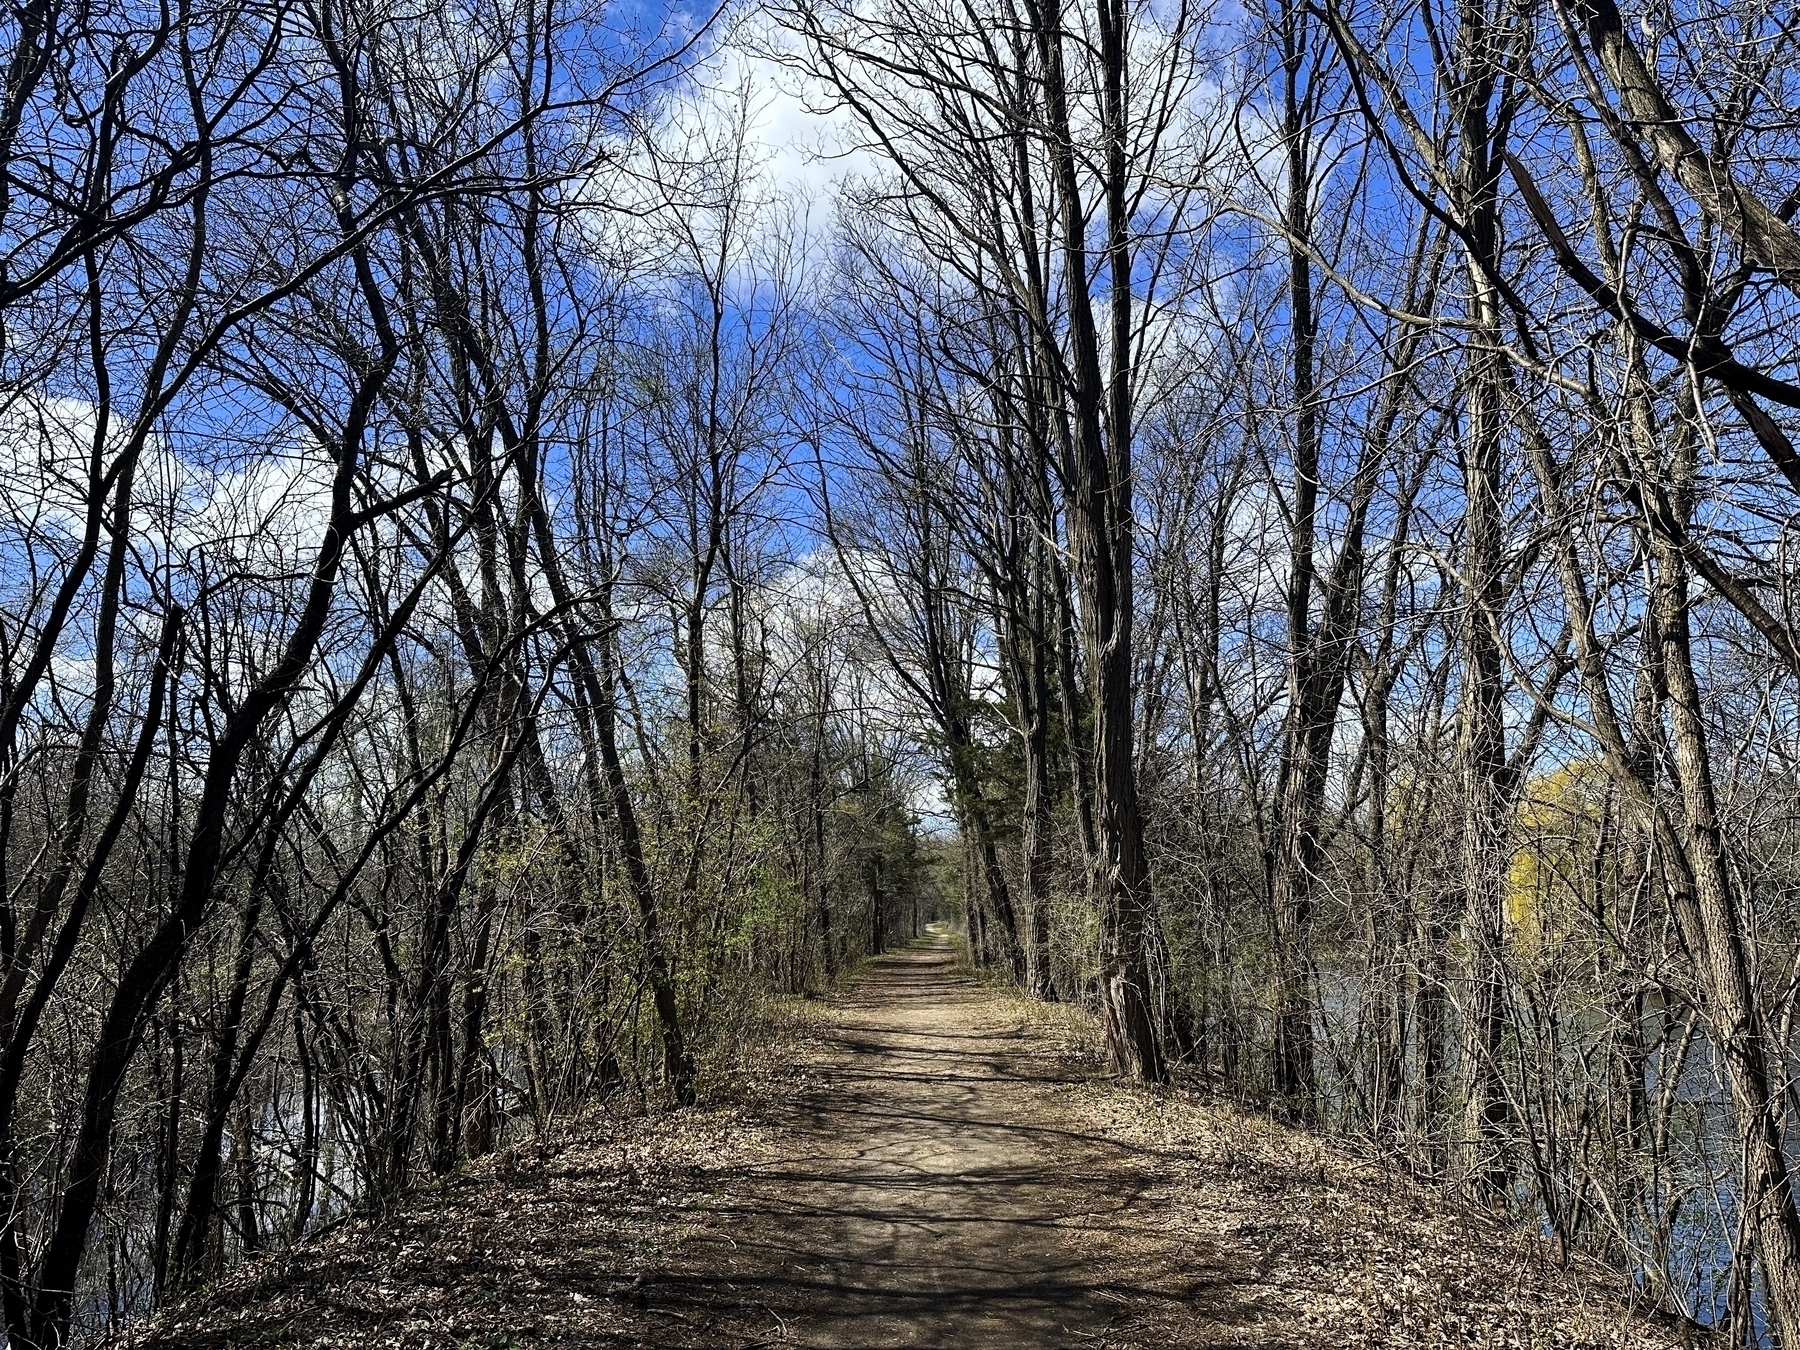 A dirt path winds through a forest with leafless trees under a clear blue sky.